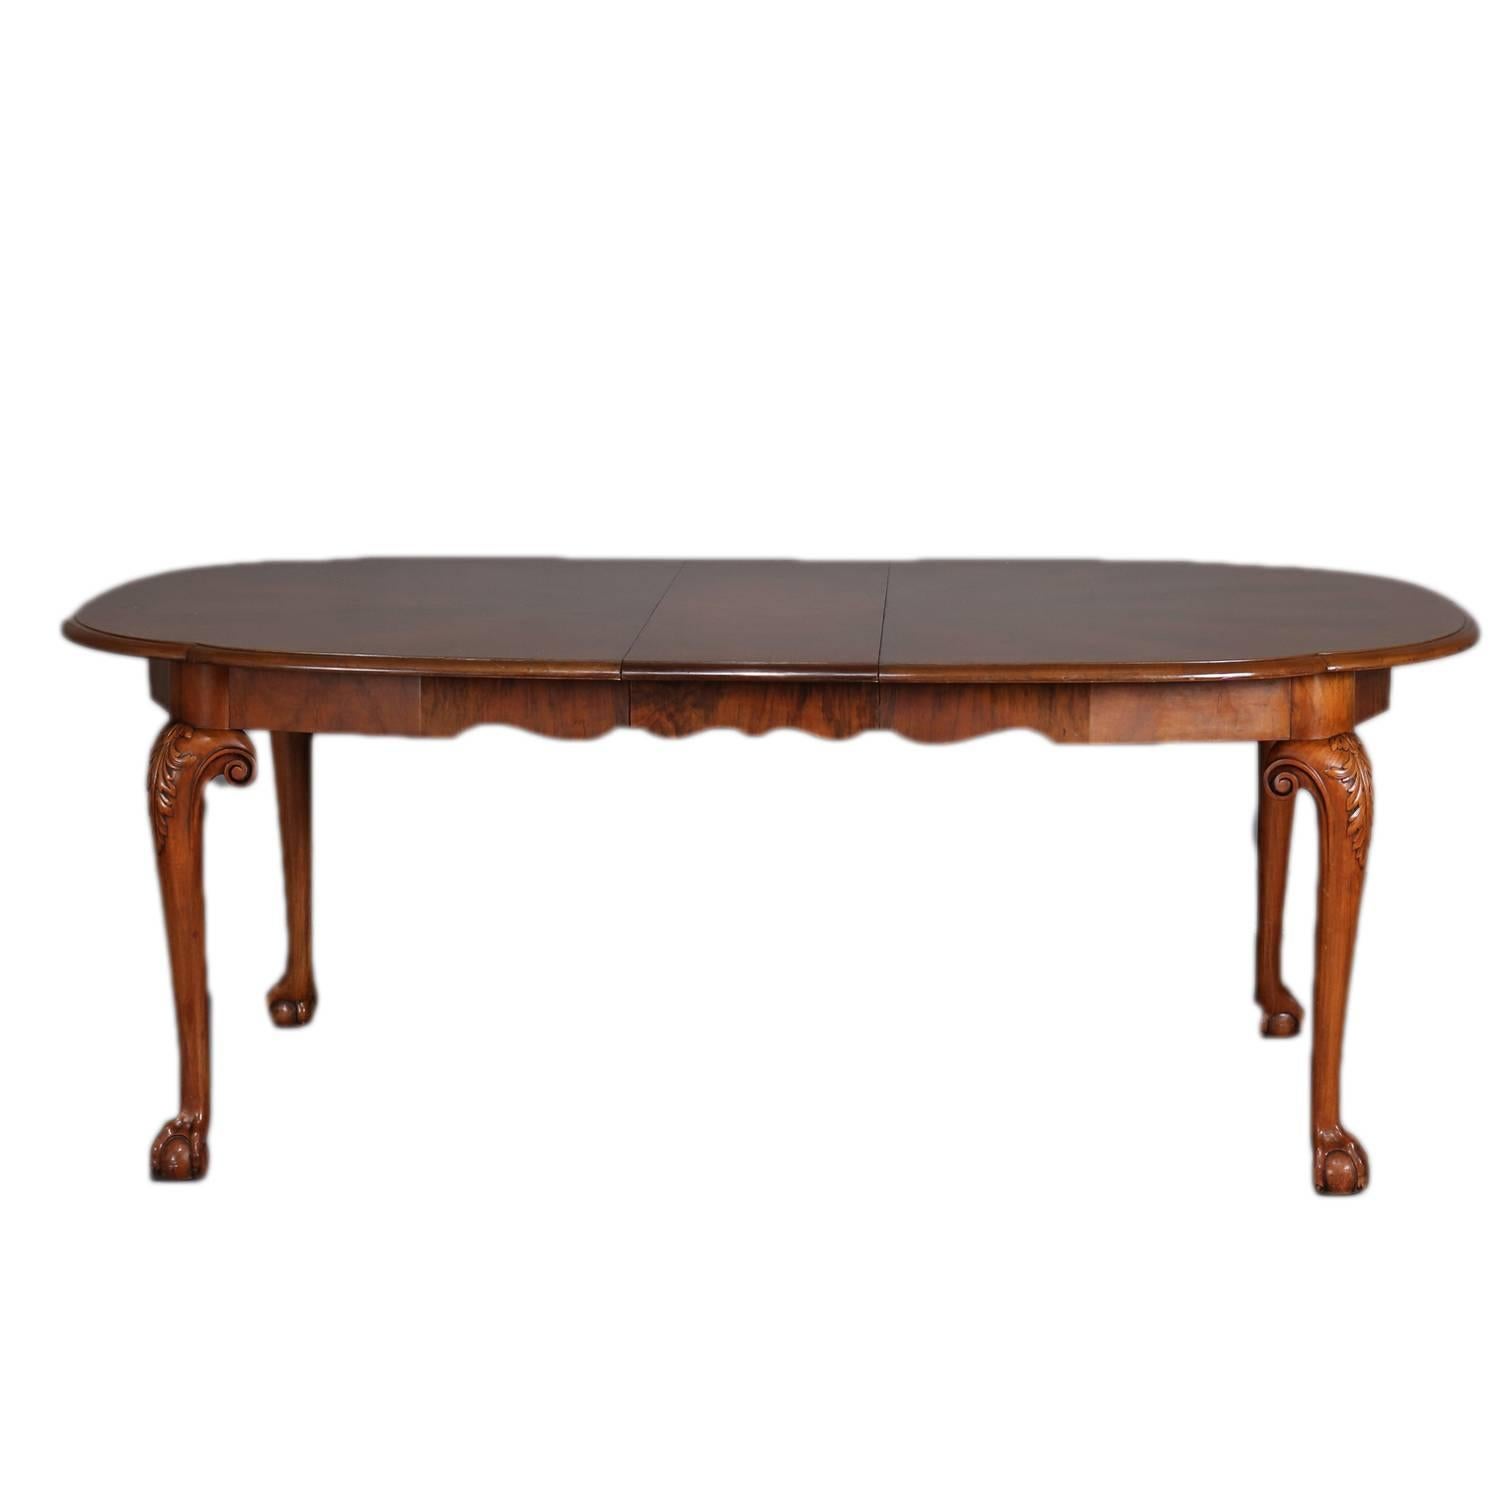 Chippendale School dining room set by Schmeig & Kotzian, Inc. New York features flame mahogany table and six chairs; table with banded top, scalloped skirt and matching flame mahogany and banded with six 12.75